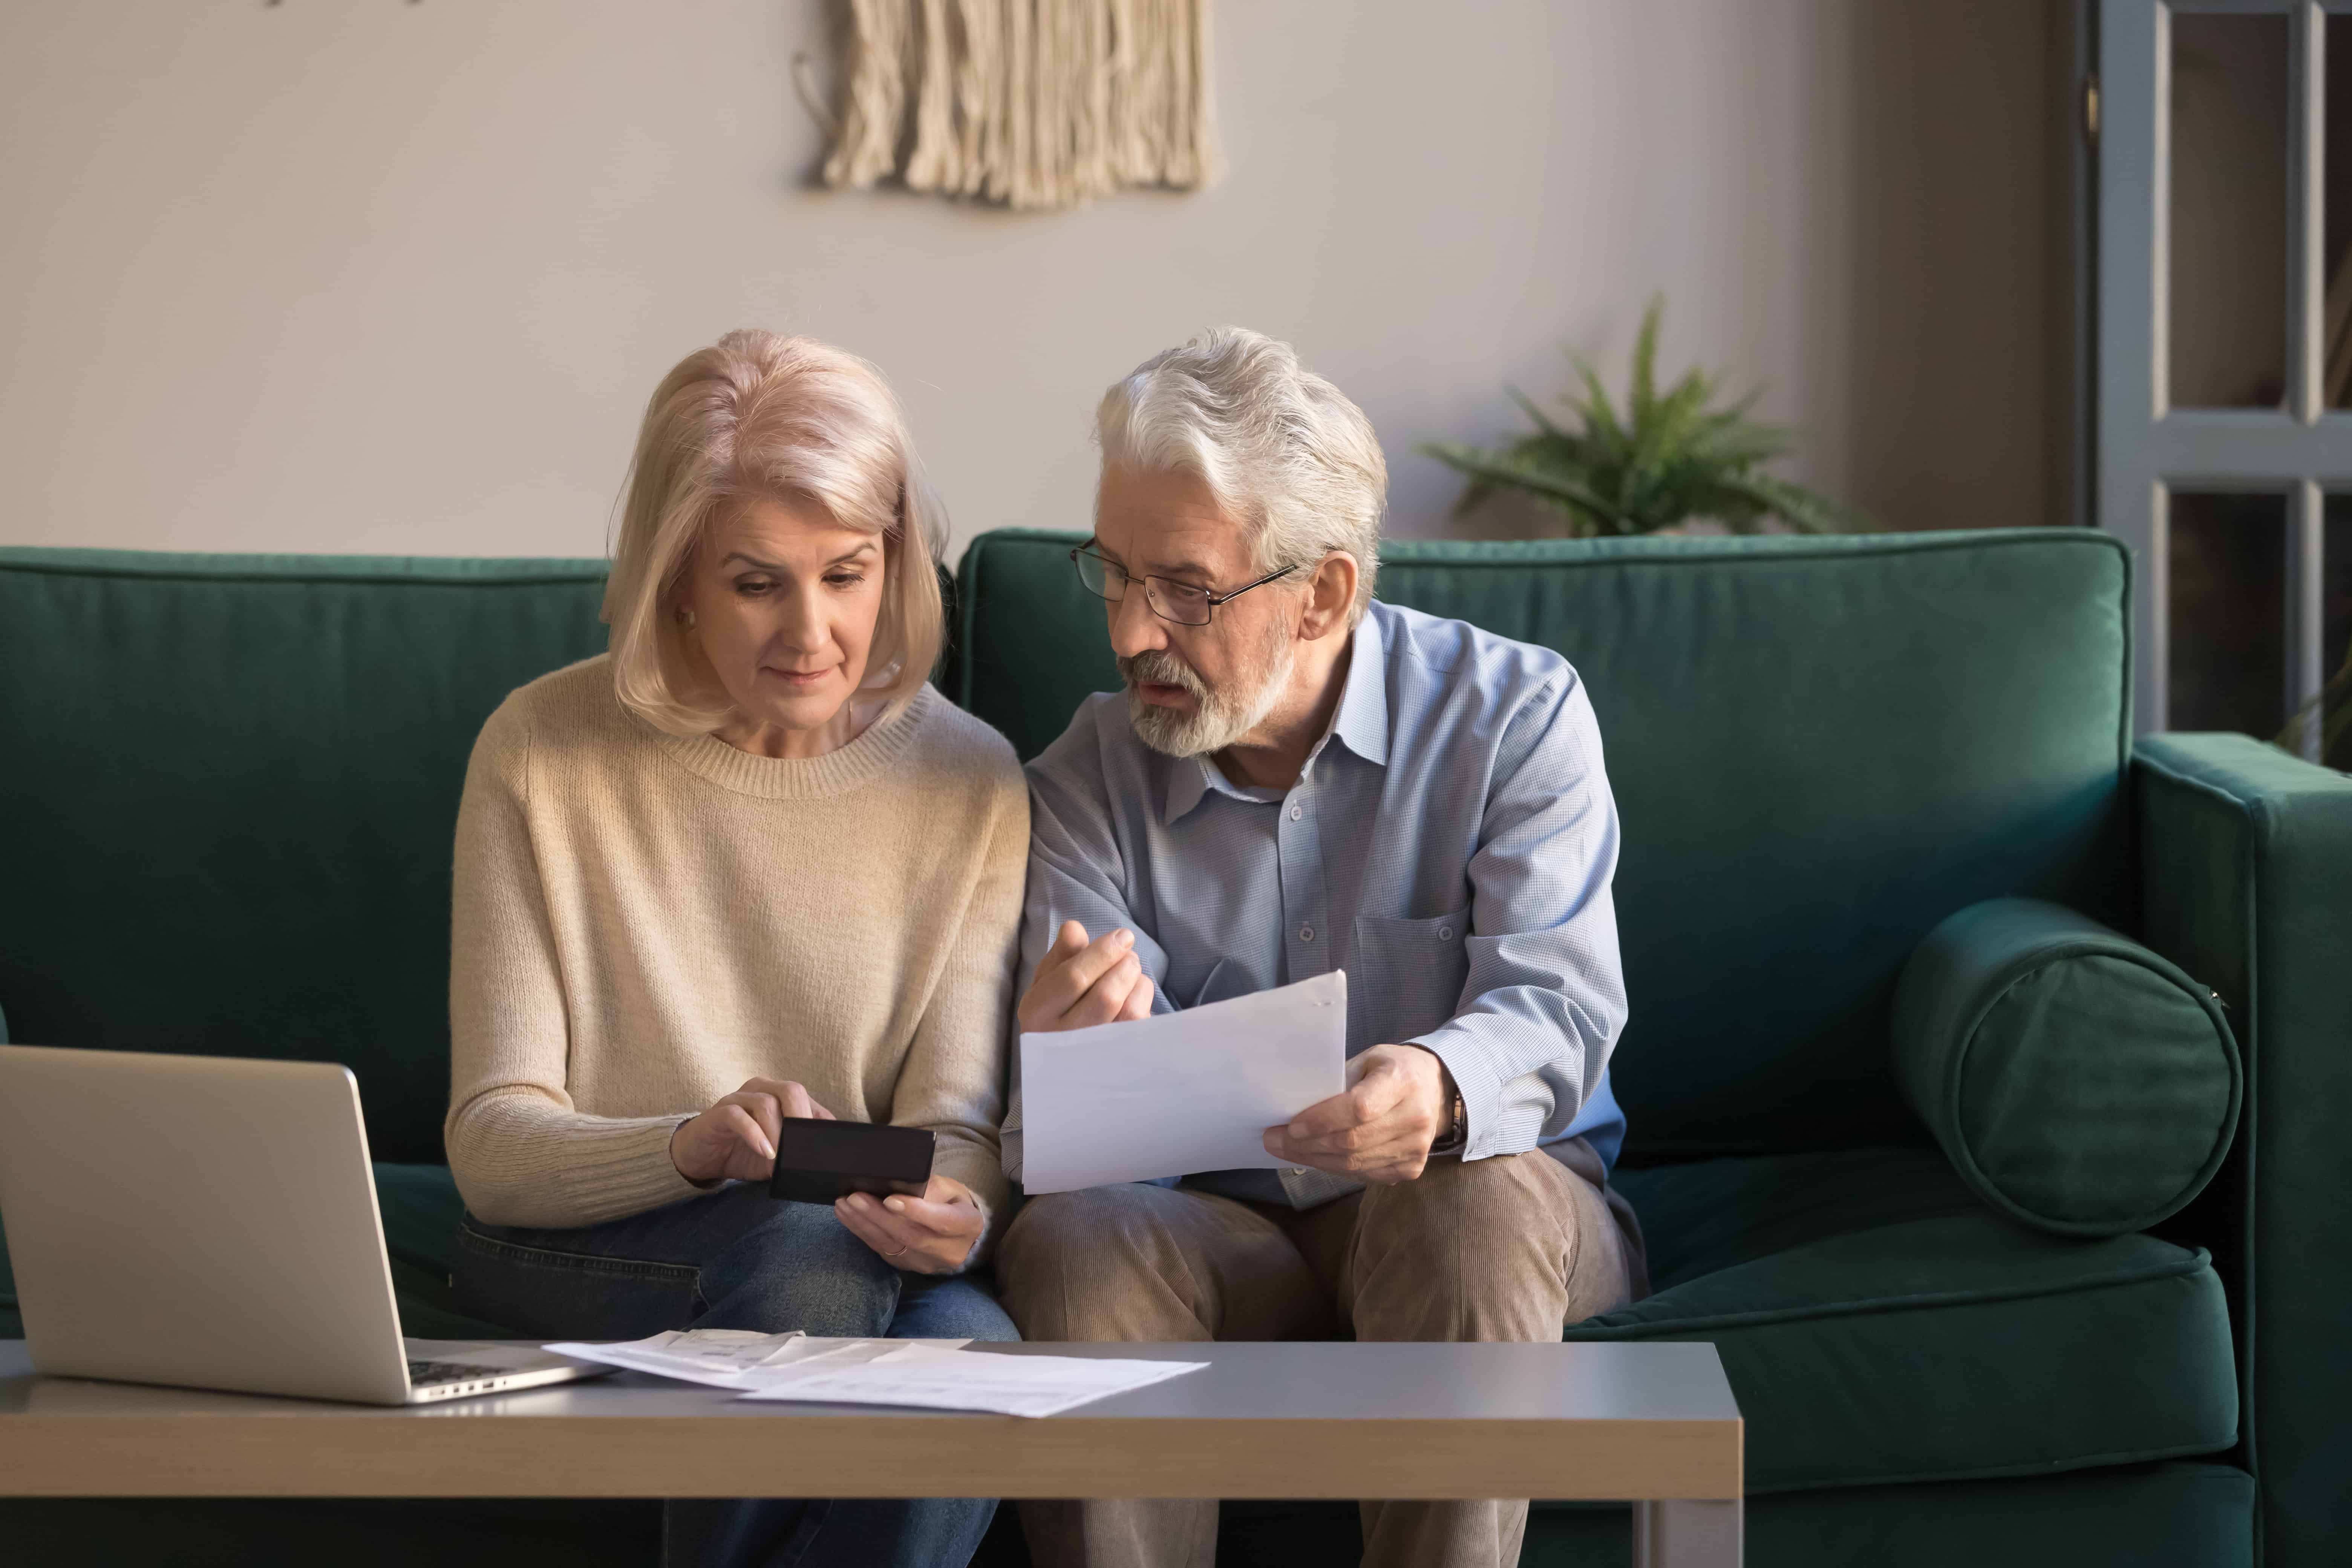 marriage after retirement, financial role adjustments for couple after retirement